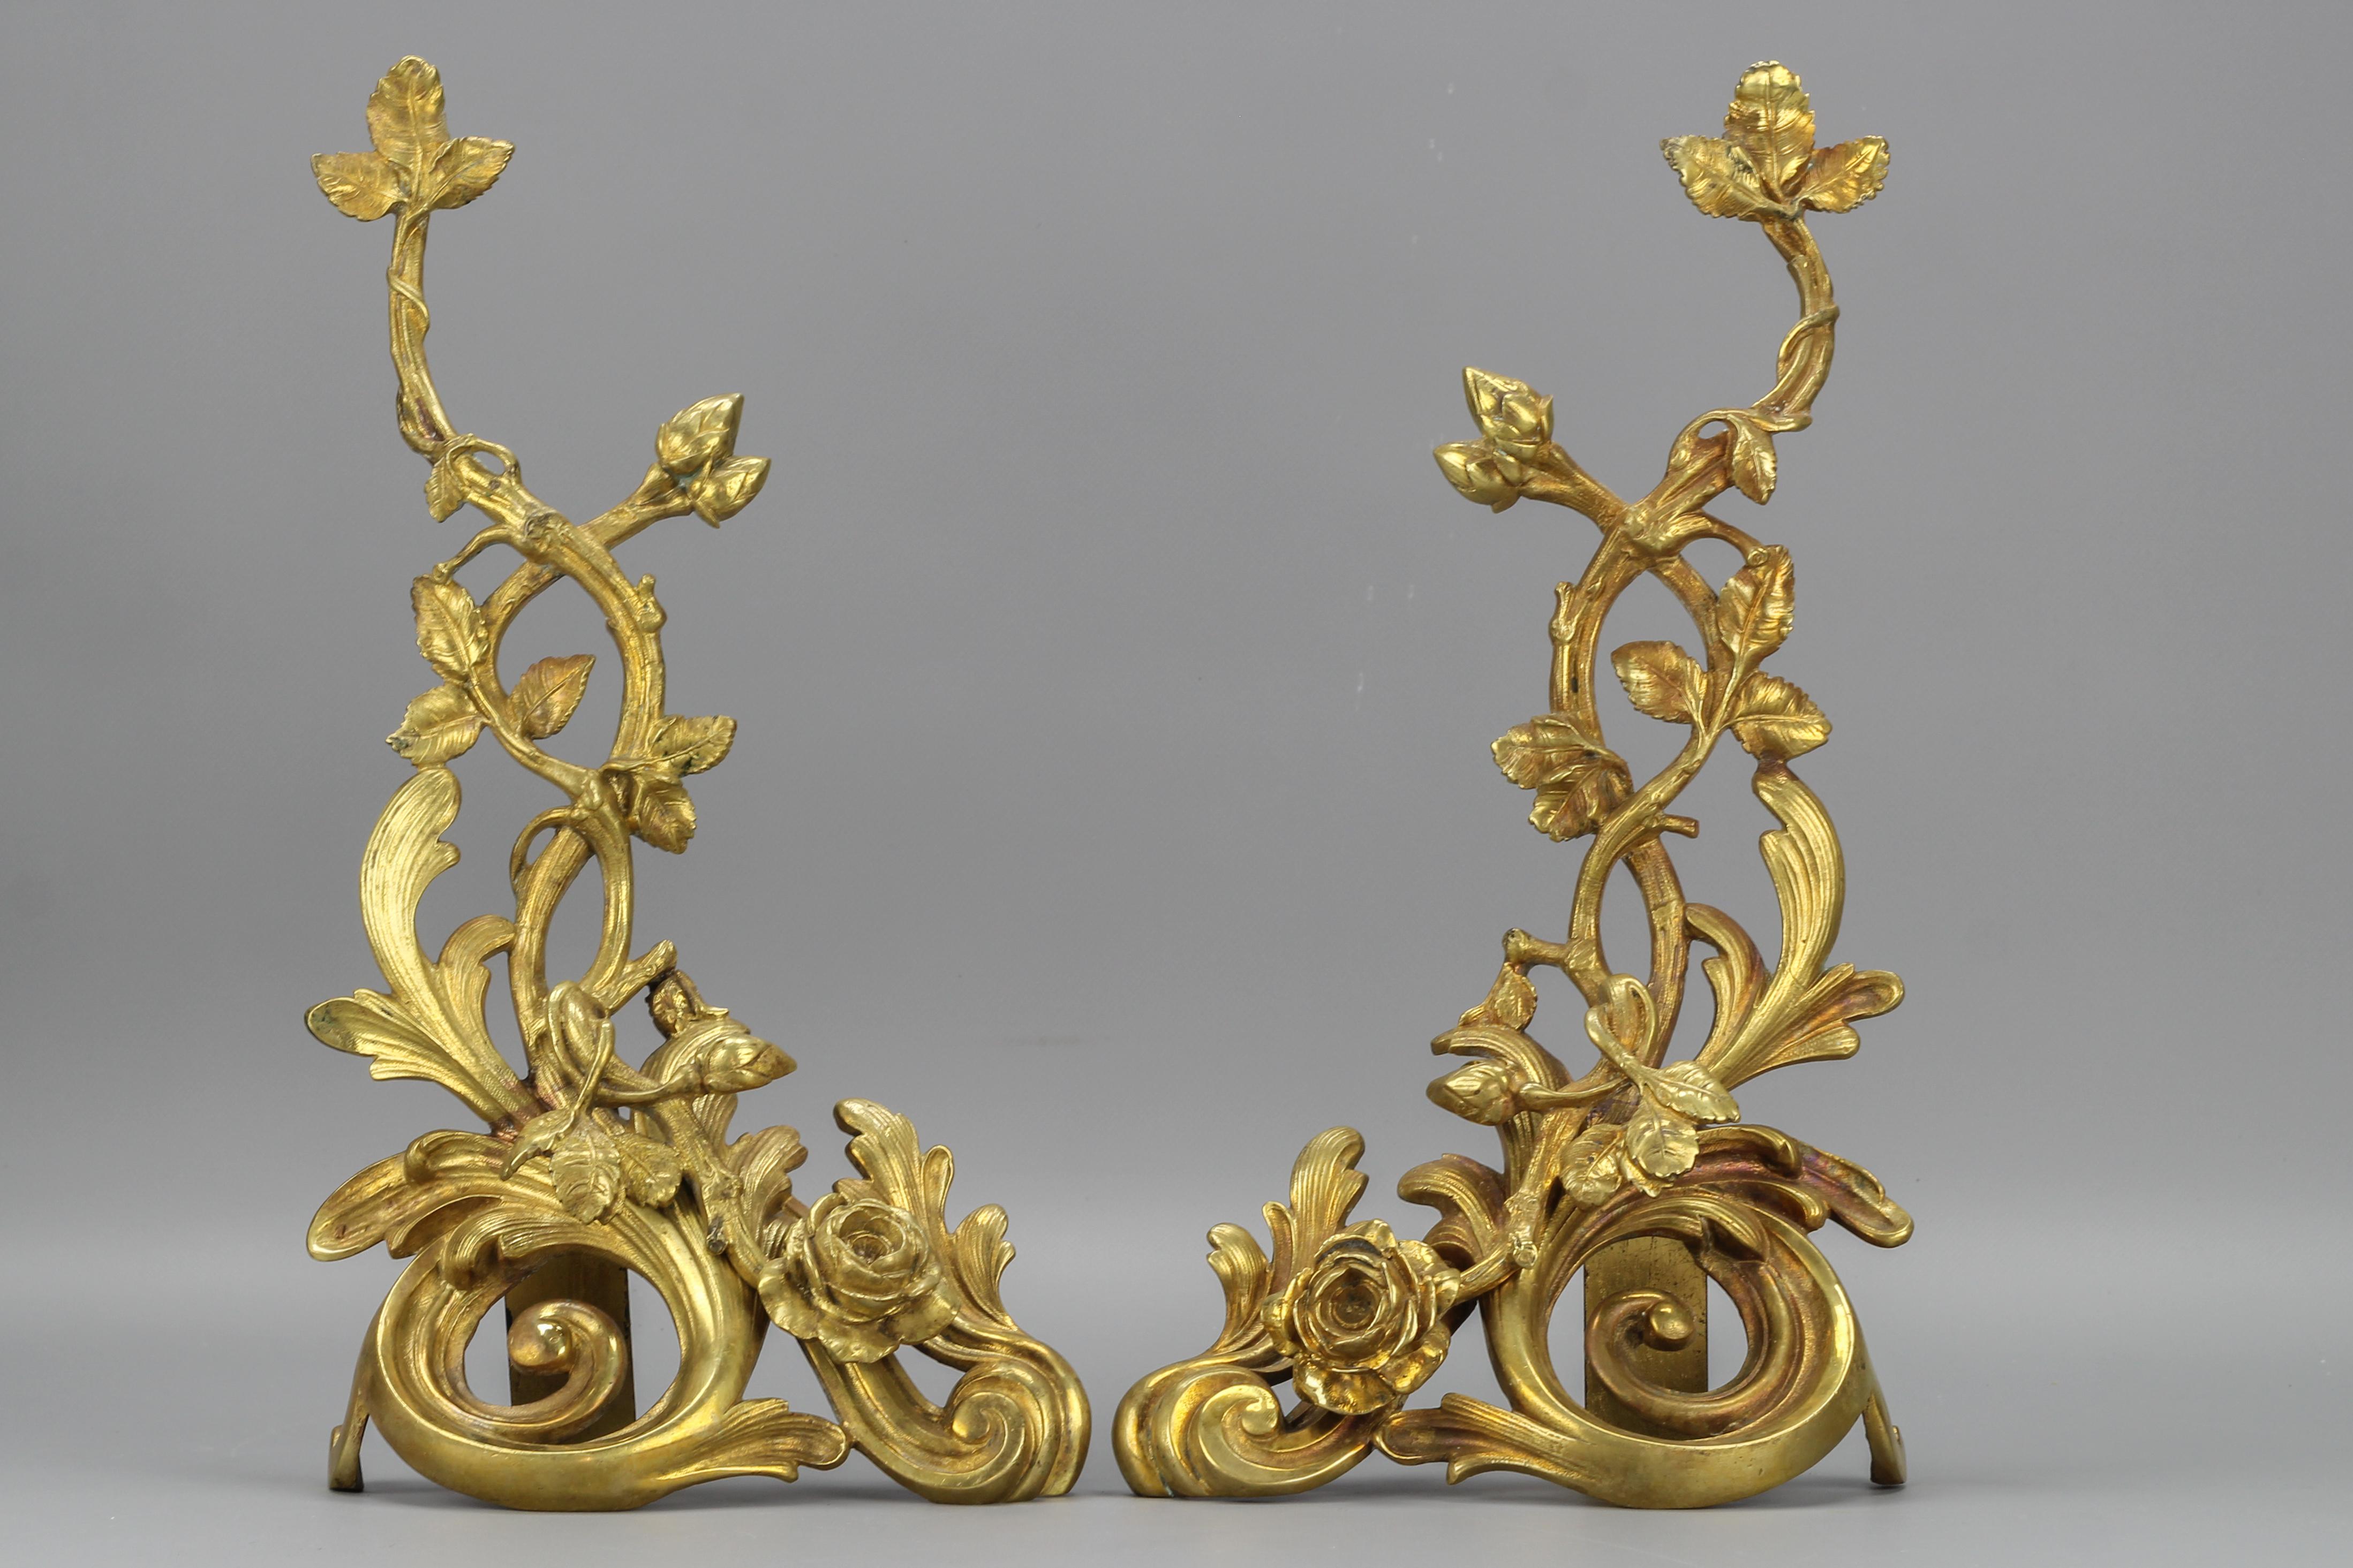 Antique French Rococo-style bronze decors with roses from the late 19th century, set of two.
This beautiful pair of bronze decors feature large acanthus leaf scrolls, adorned with a rose branch with blossoms, buds, and leaves.
Can be used as an